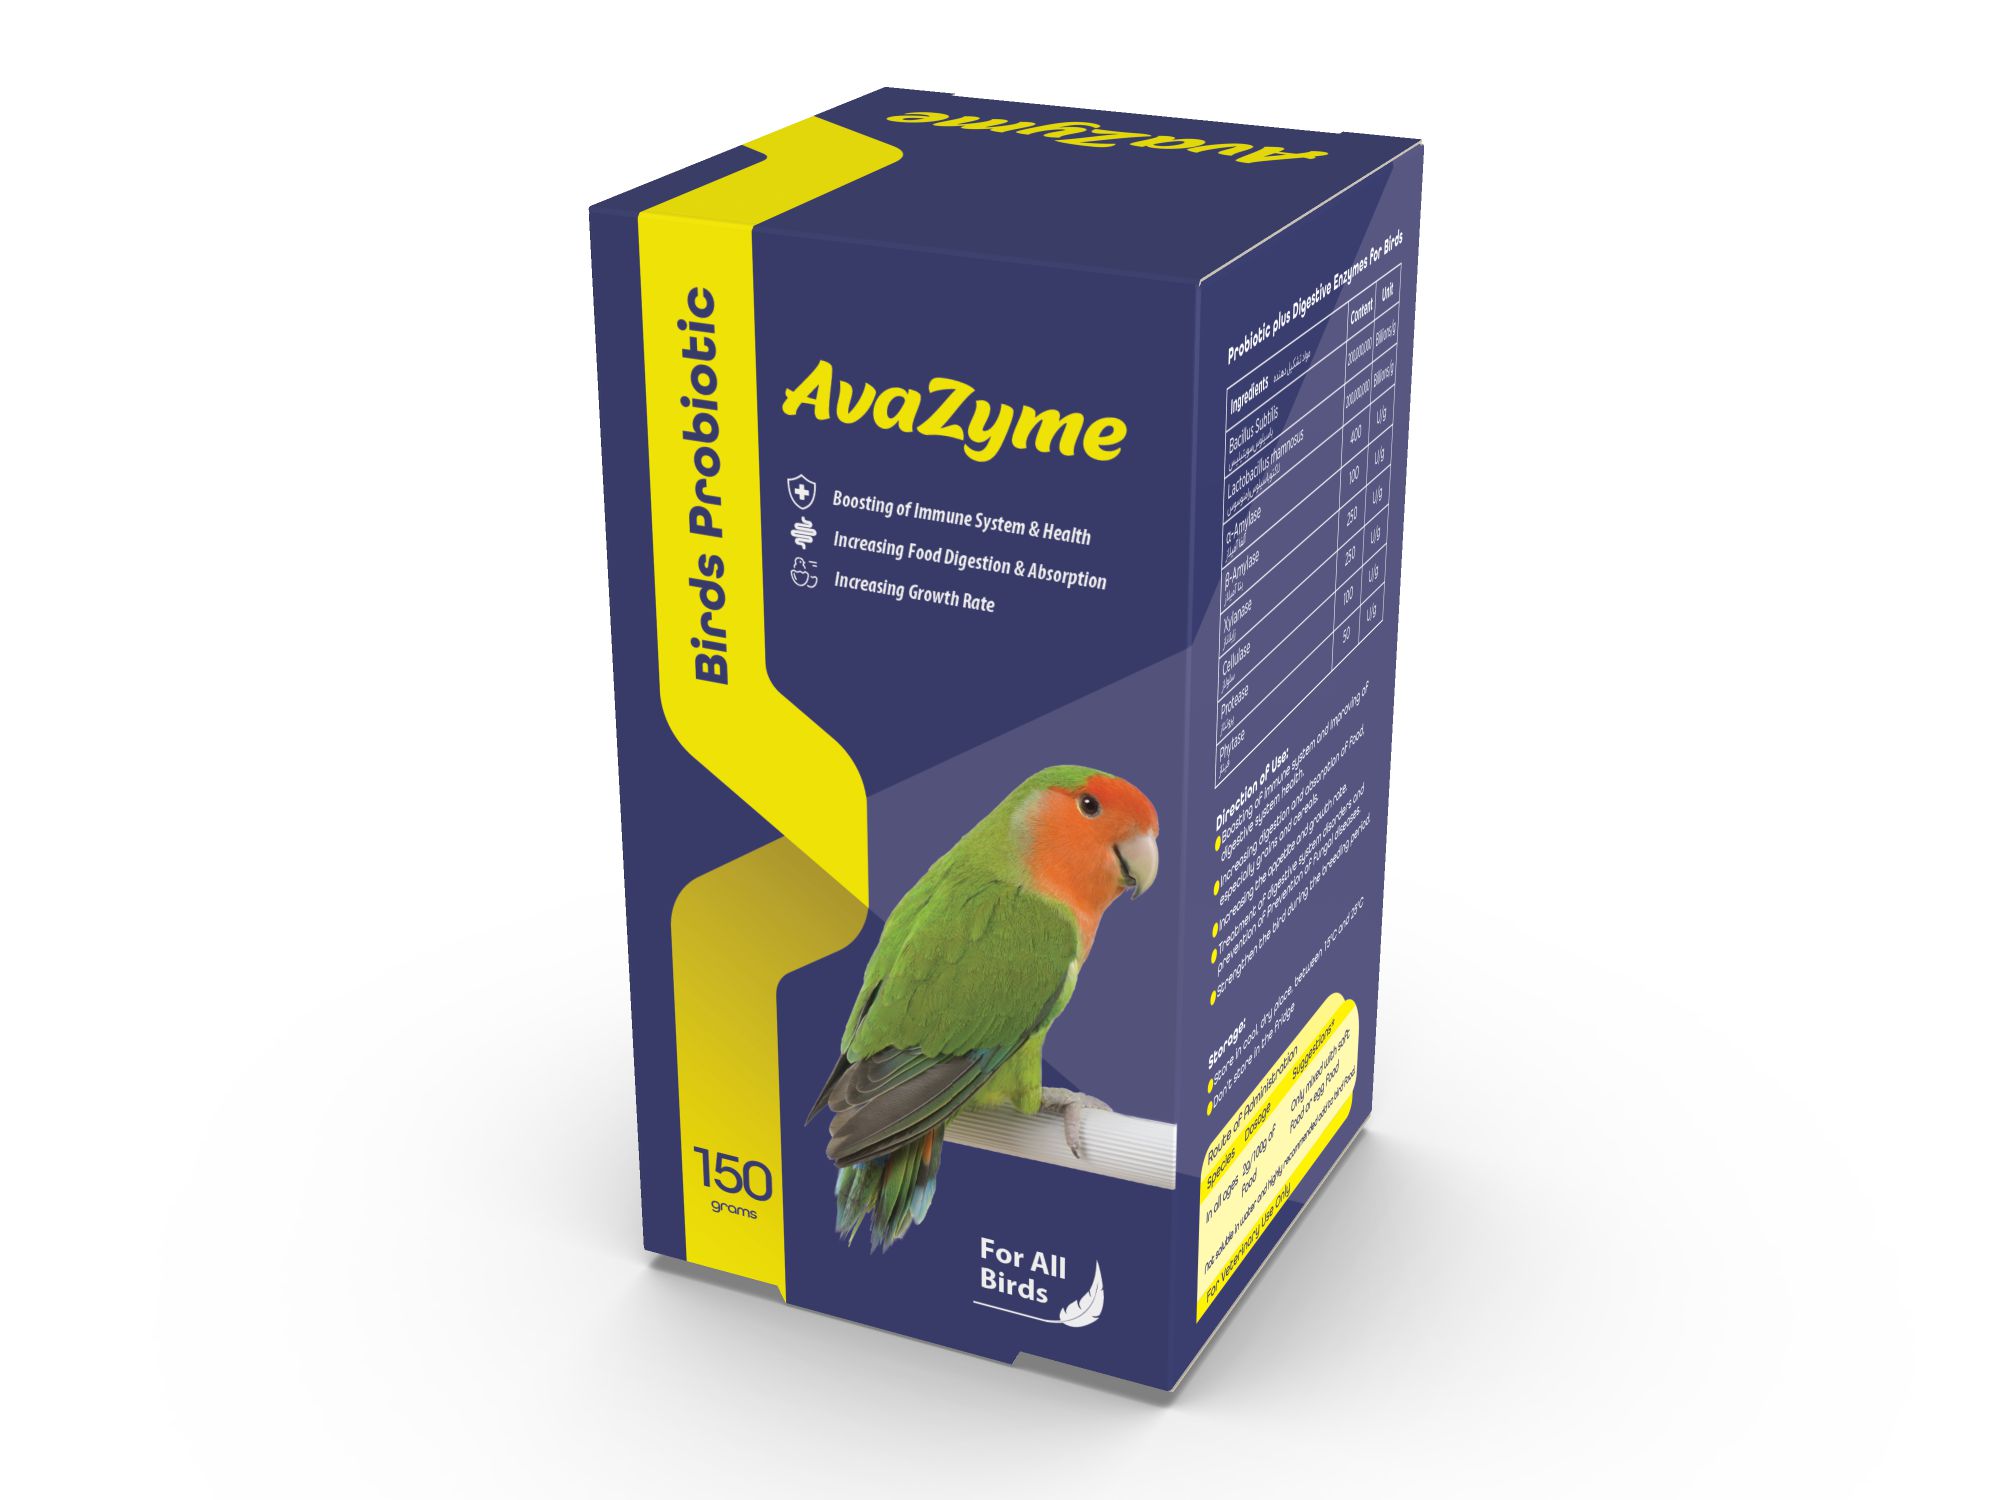 AvaZyme Bird Probiotic Packaging